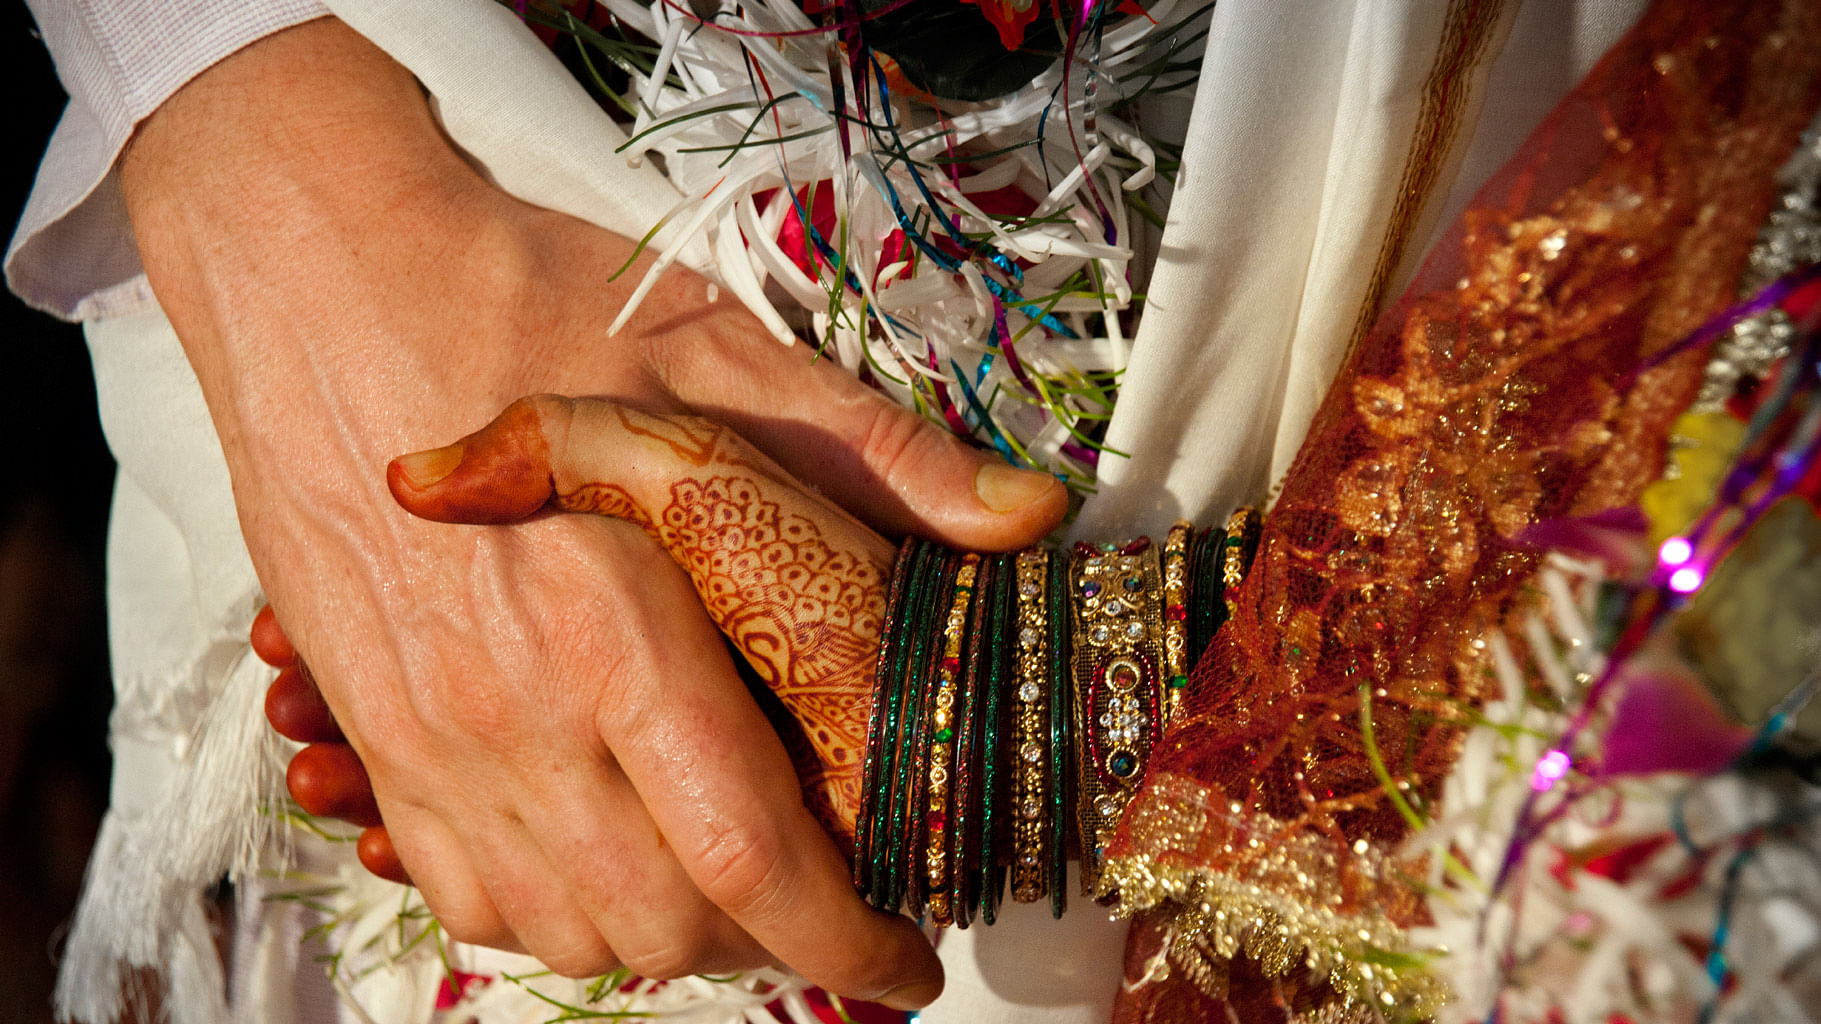 Women and Child Development minister Maneka Gandhi has shared her intent to  introduce prenup agreements as legally binding documents for Indian couples. Will they  work? (Photo: iStock)